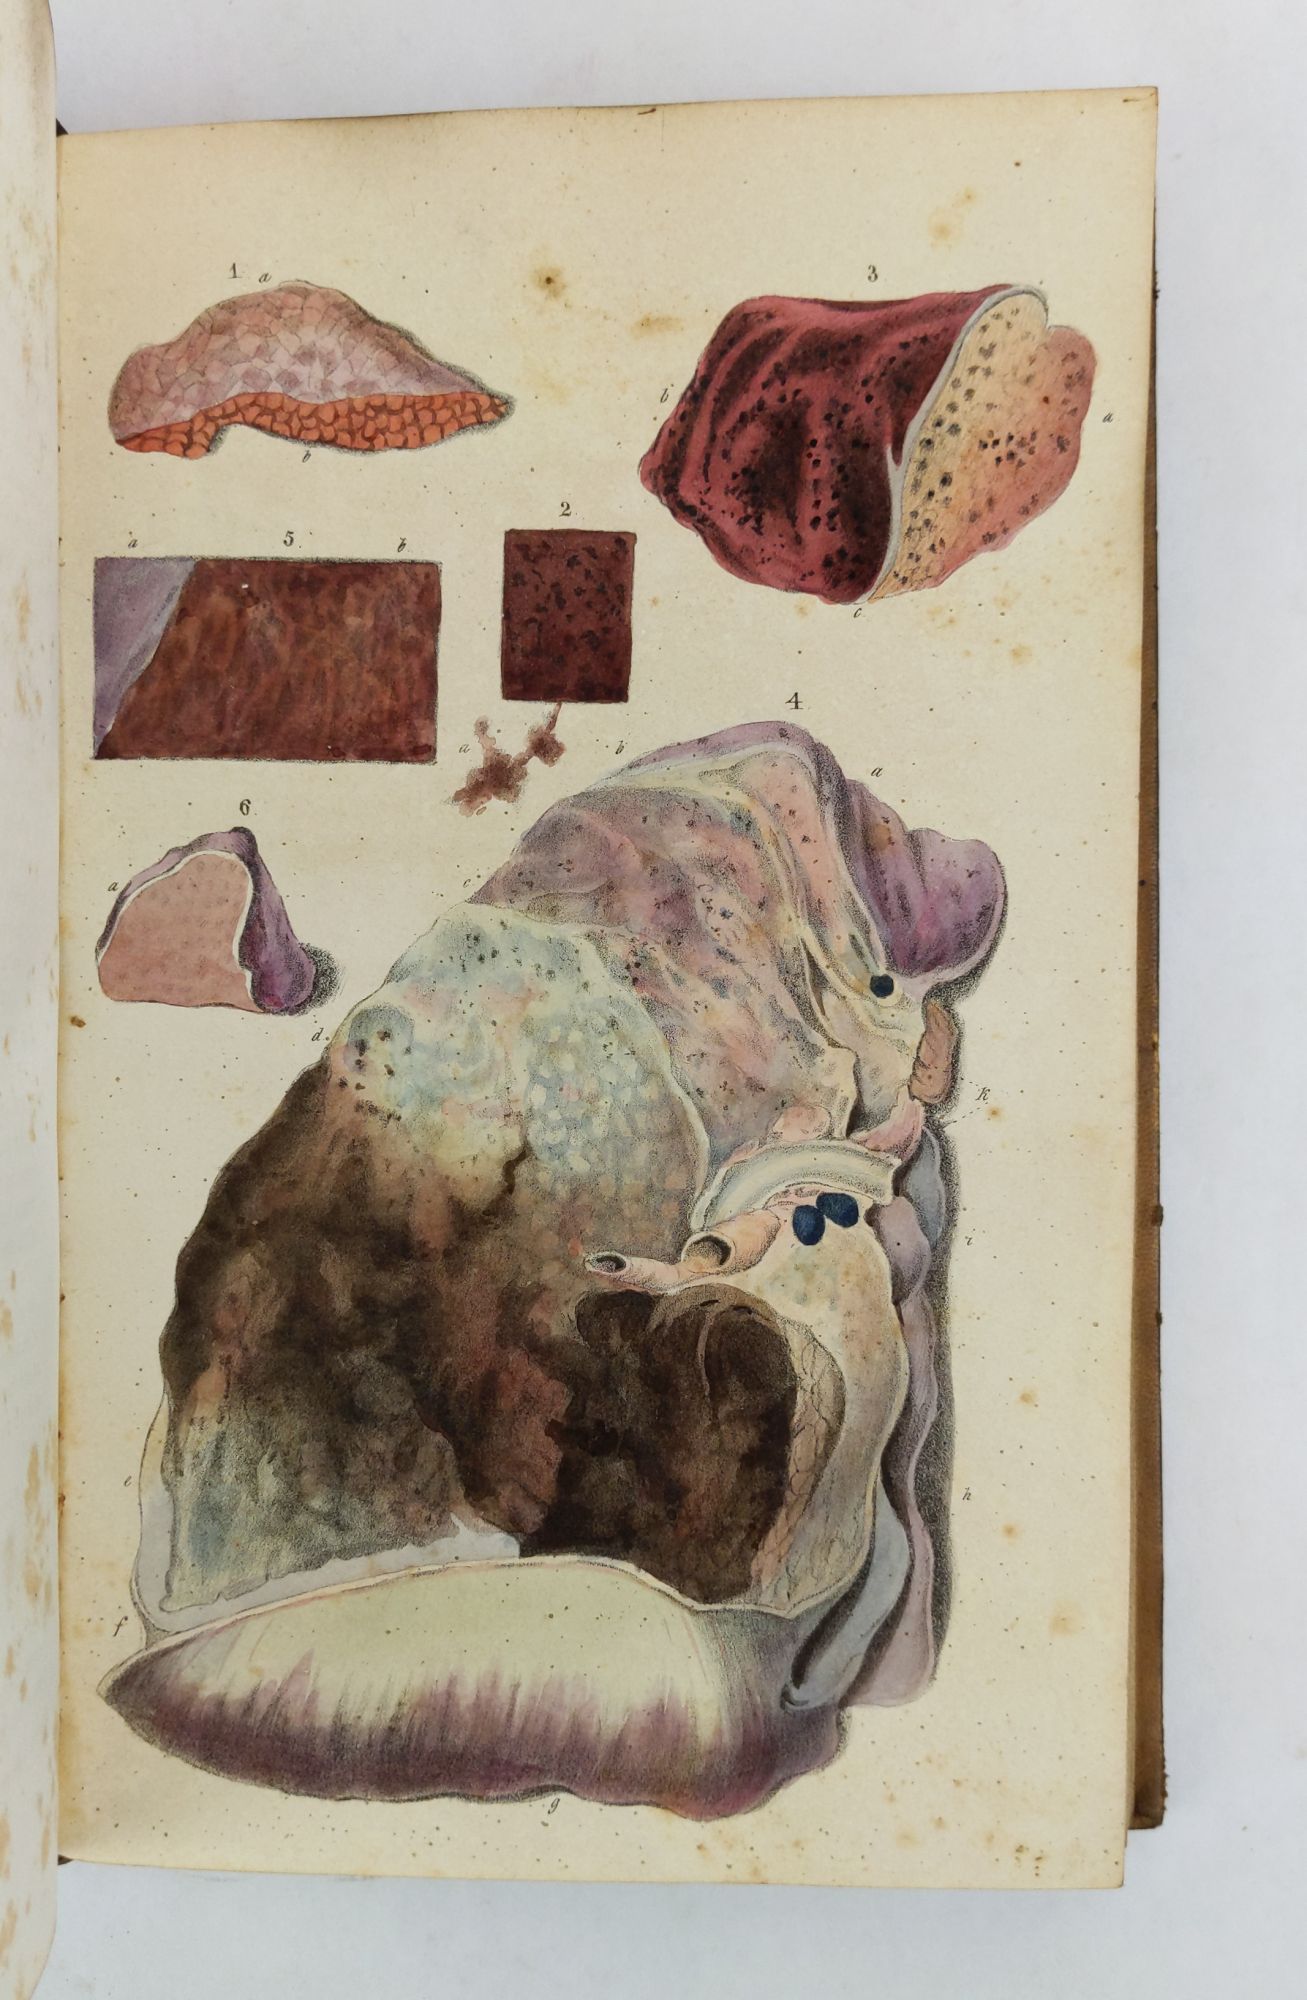 Product Image for PRINCIPLES OF PATHOLOGICAL ANATOMY: ADAPTED TO THE CYCLOPEDIA OF PRACTICAL MEDICINE AND ANDRAL'S ELEMENTS. WITH TWO HUNDRED AND SIXTY BEAUTIFULLY COLORED ILLUSTRATIONS